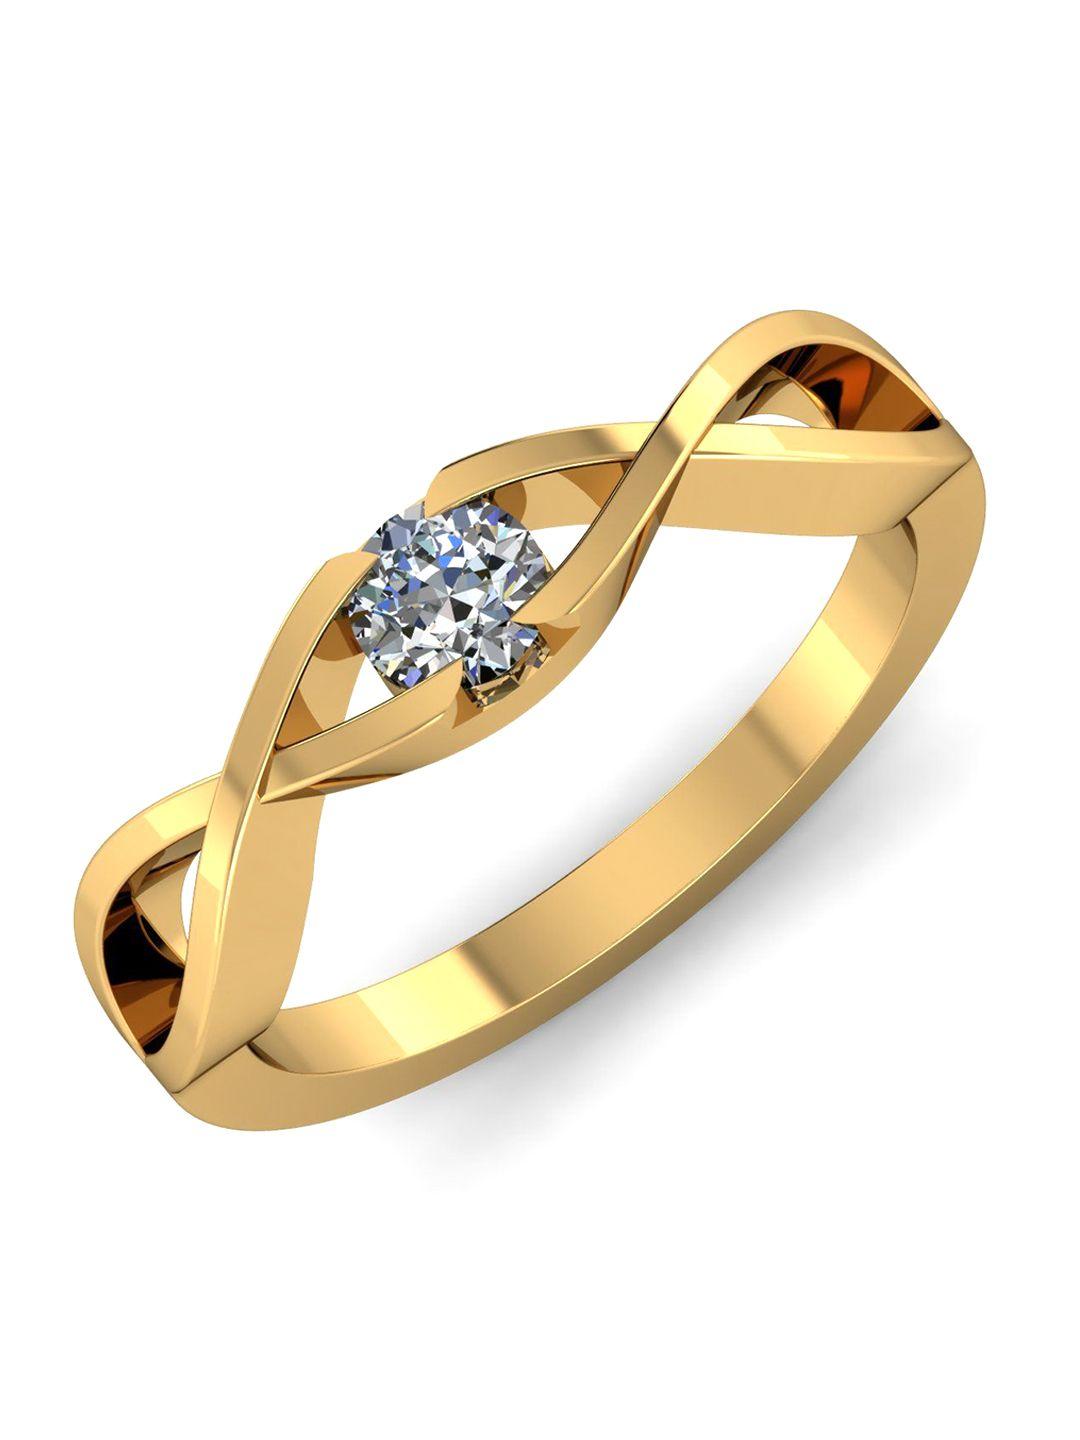 kuberbox-18kt-solitaire-gold-diamond-studded-ring--3.4-gm